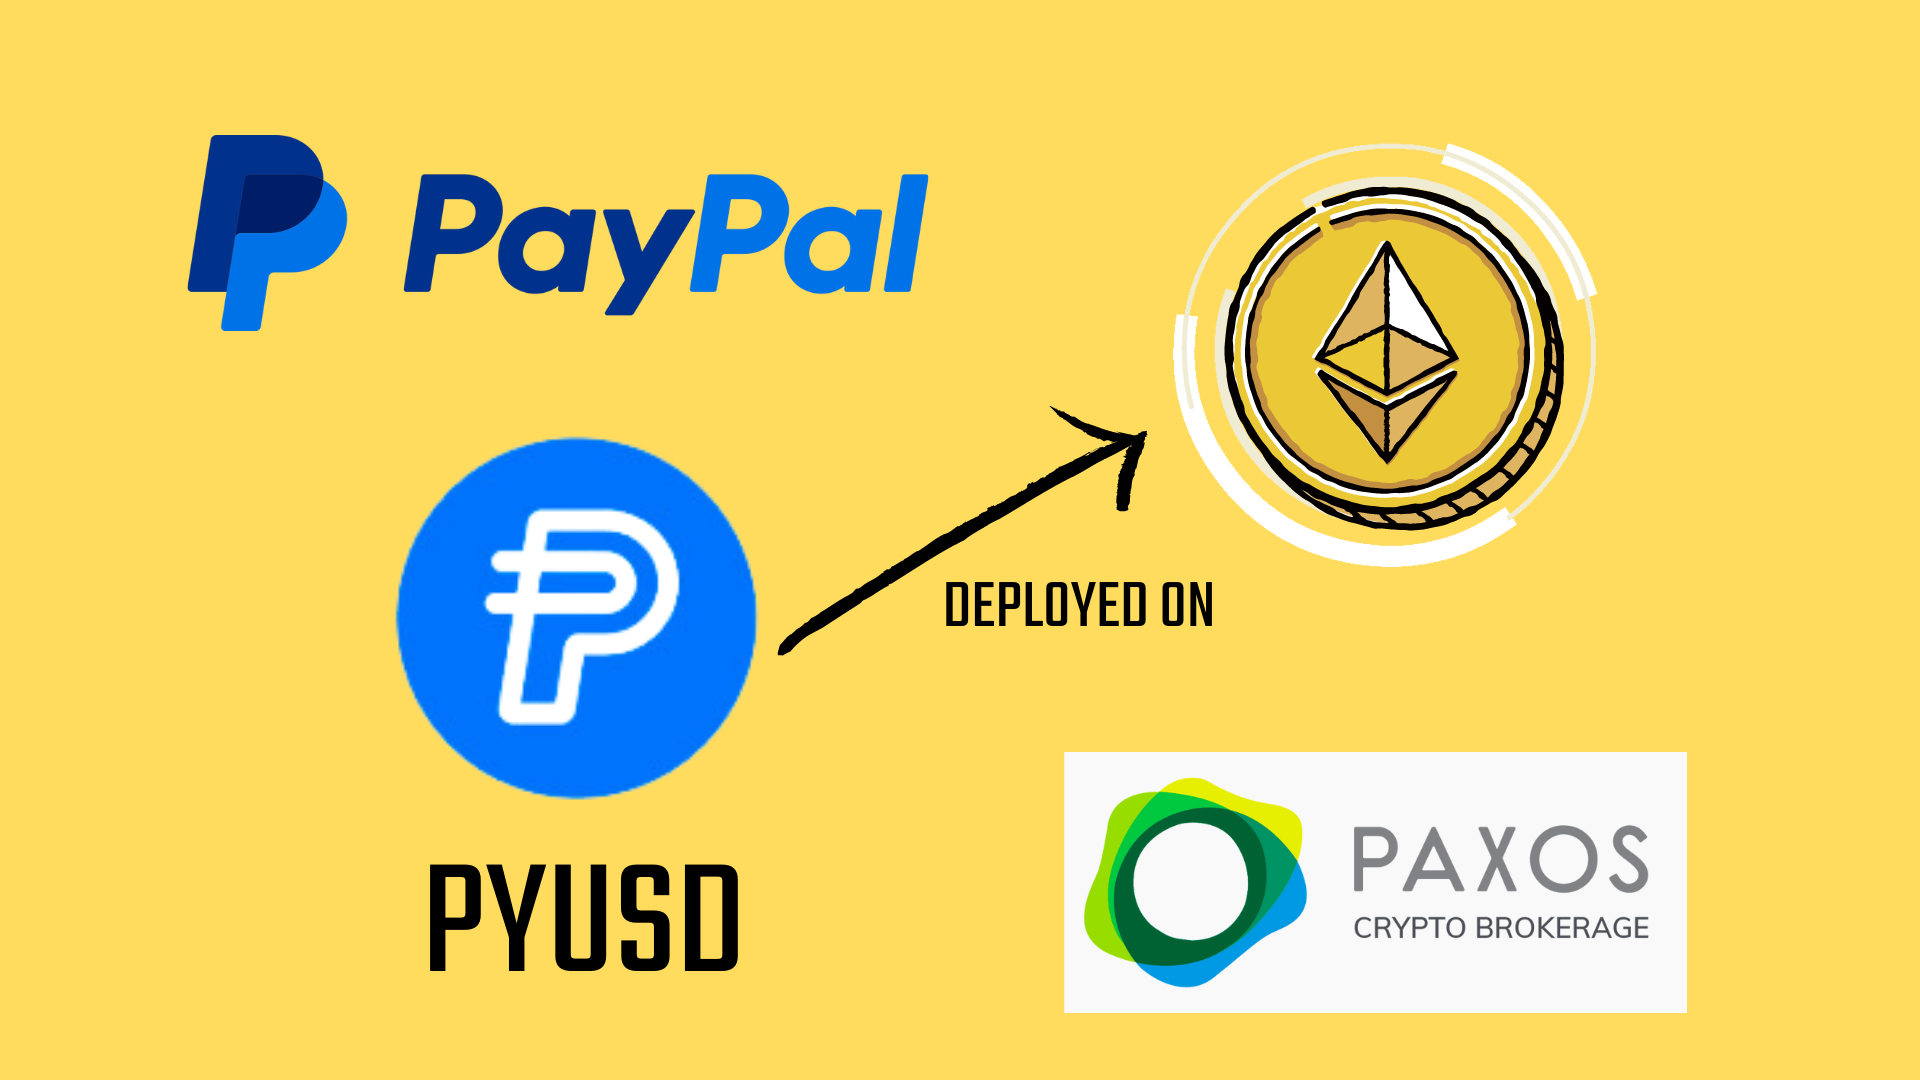 The PayPalUSD